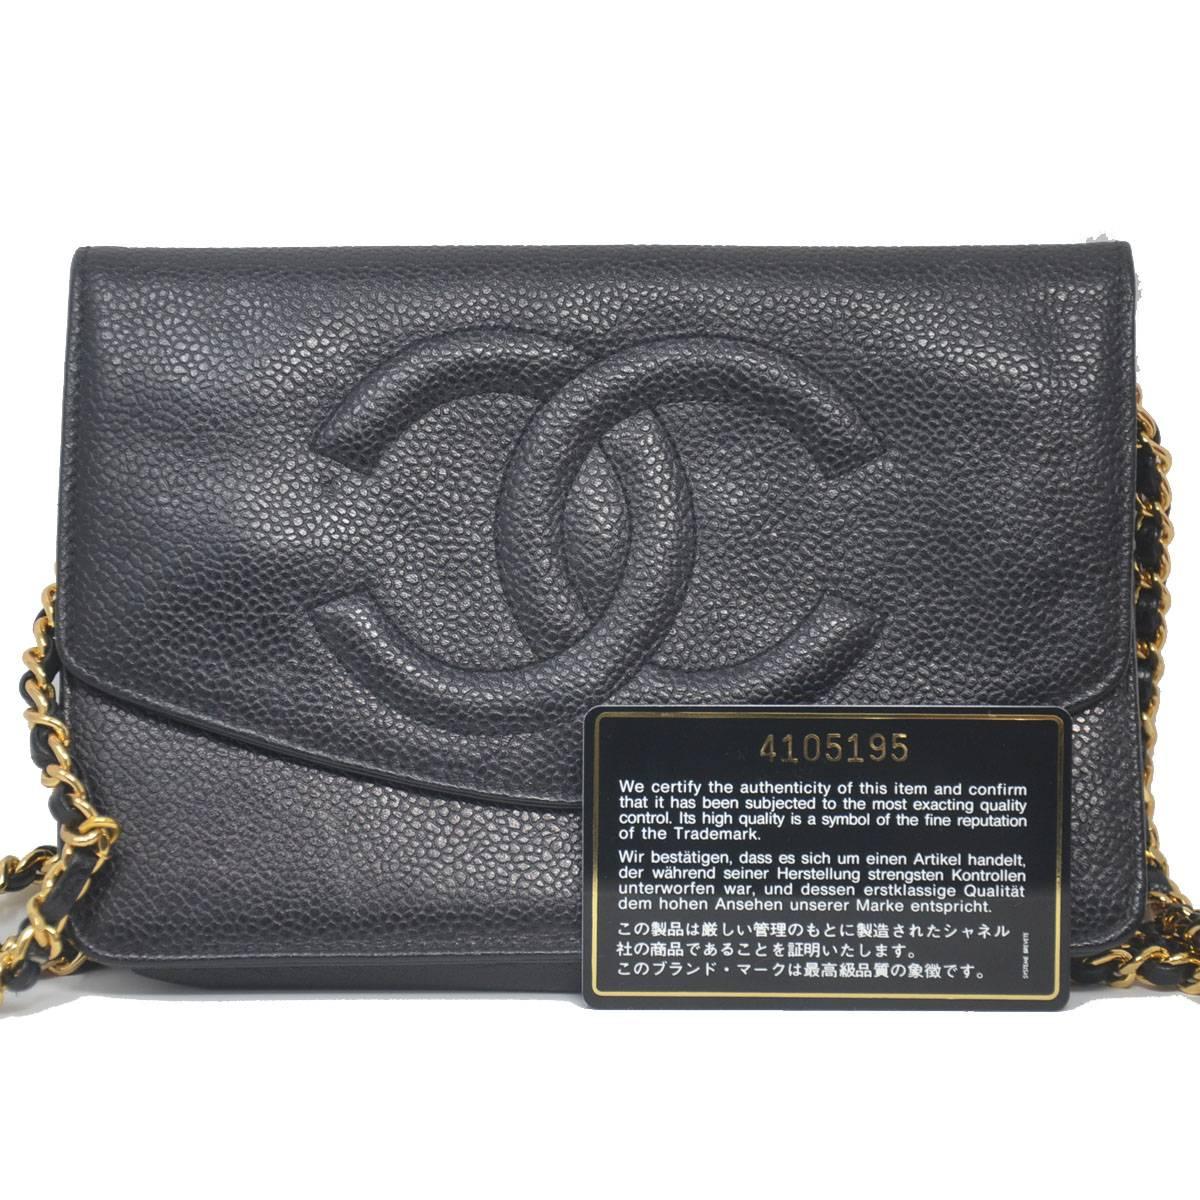 Company-Chanel
Model-WOC Black Caviar CC Gold Hardware With Card
Color-Black
Date Code-4105195
Material-Leather
Measurements-7.5